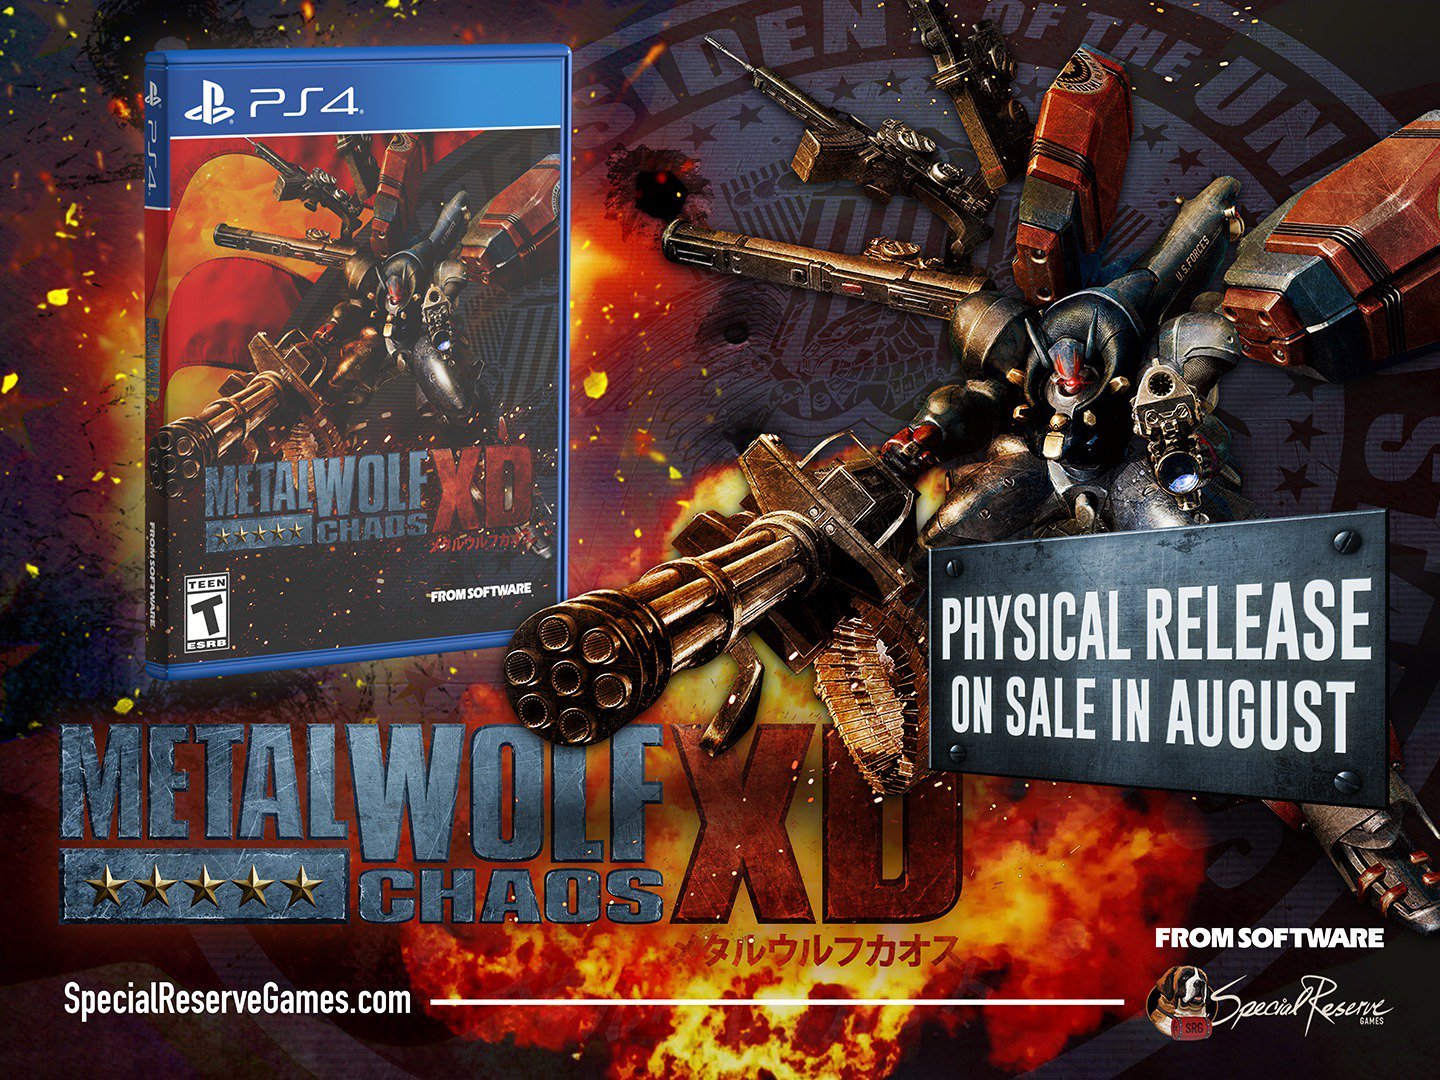 Metal Wolf Chaos XD PS4 limited run physical edition announced